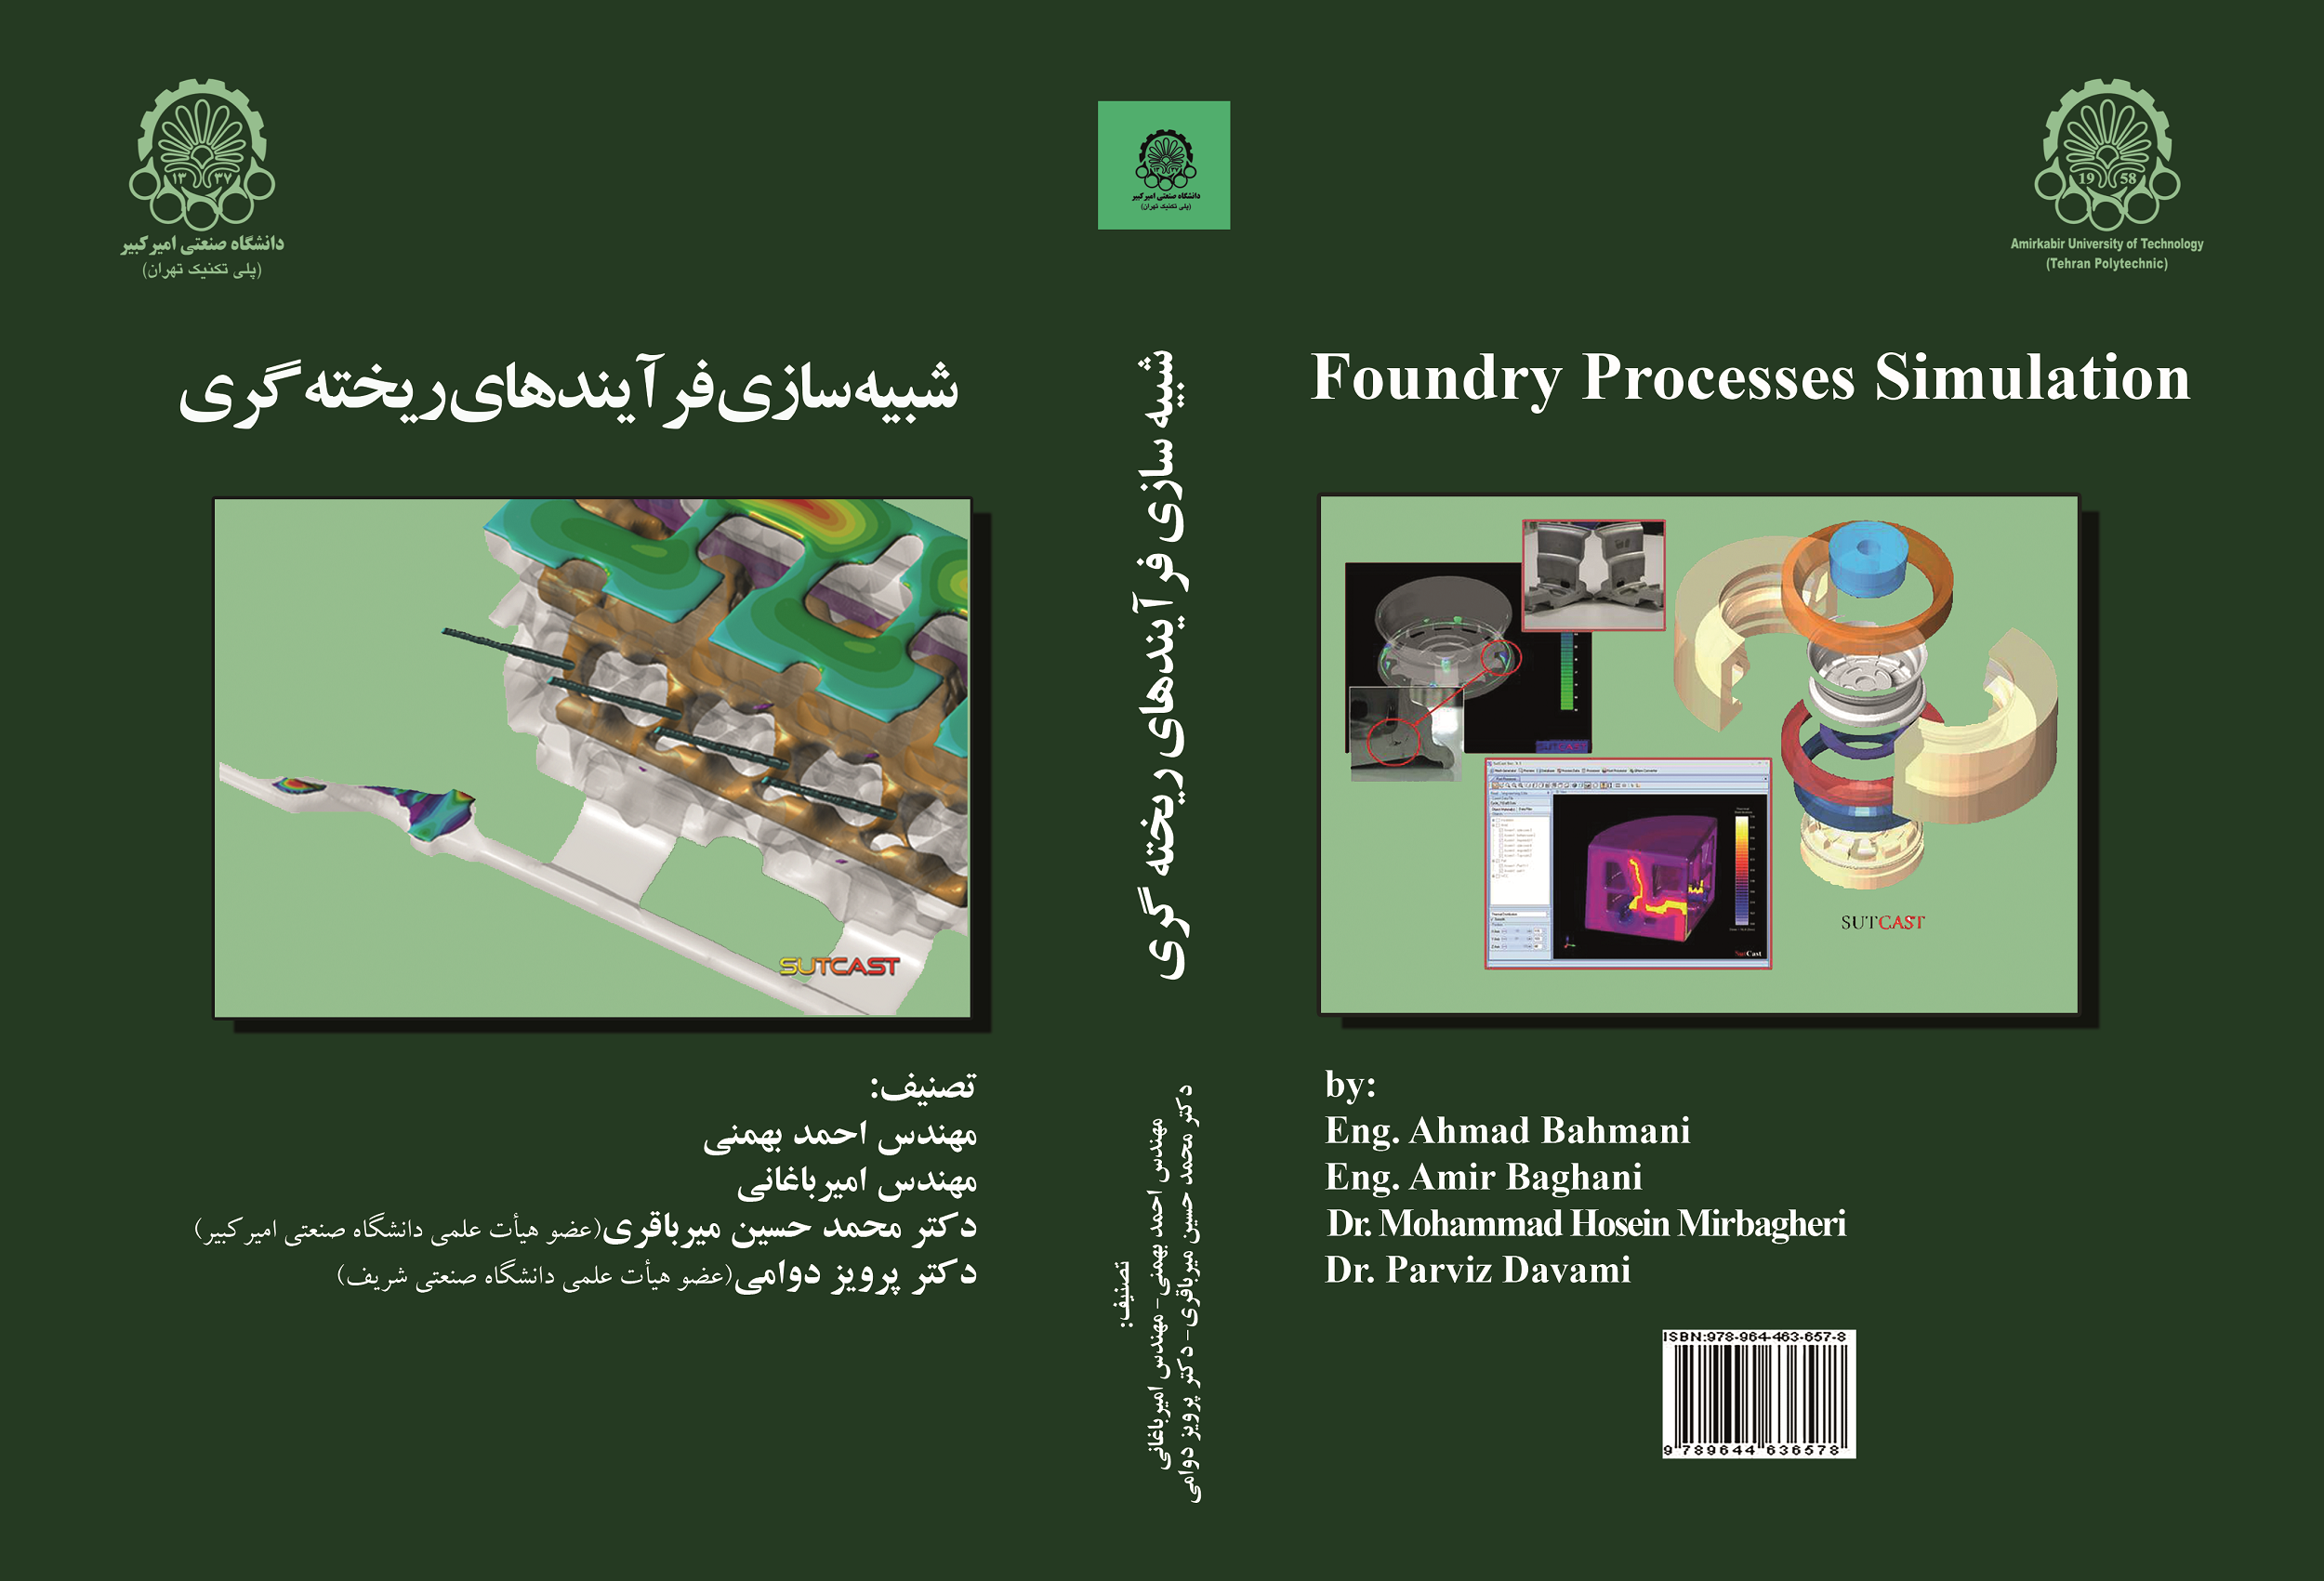 The book "Foundry Processes Simulation"was selected as a valuable contribution